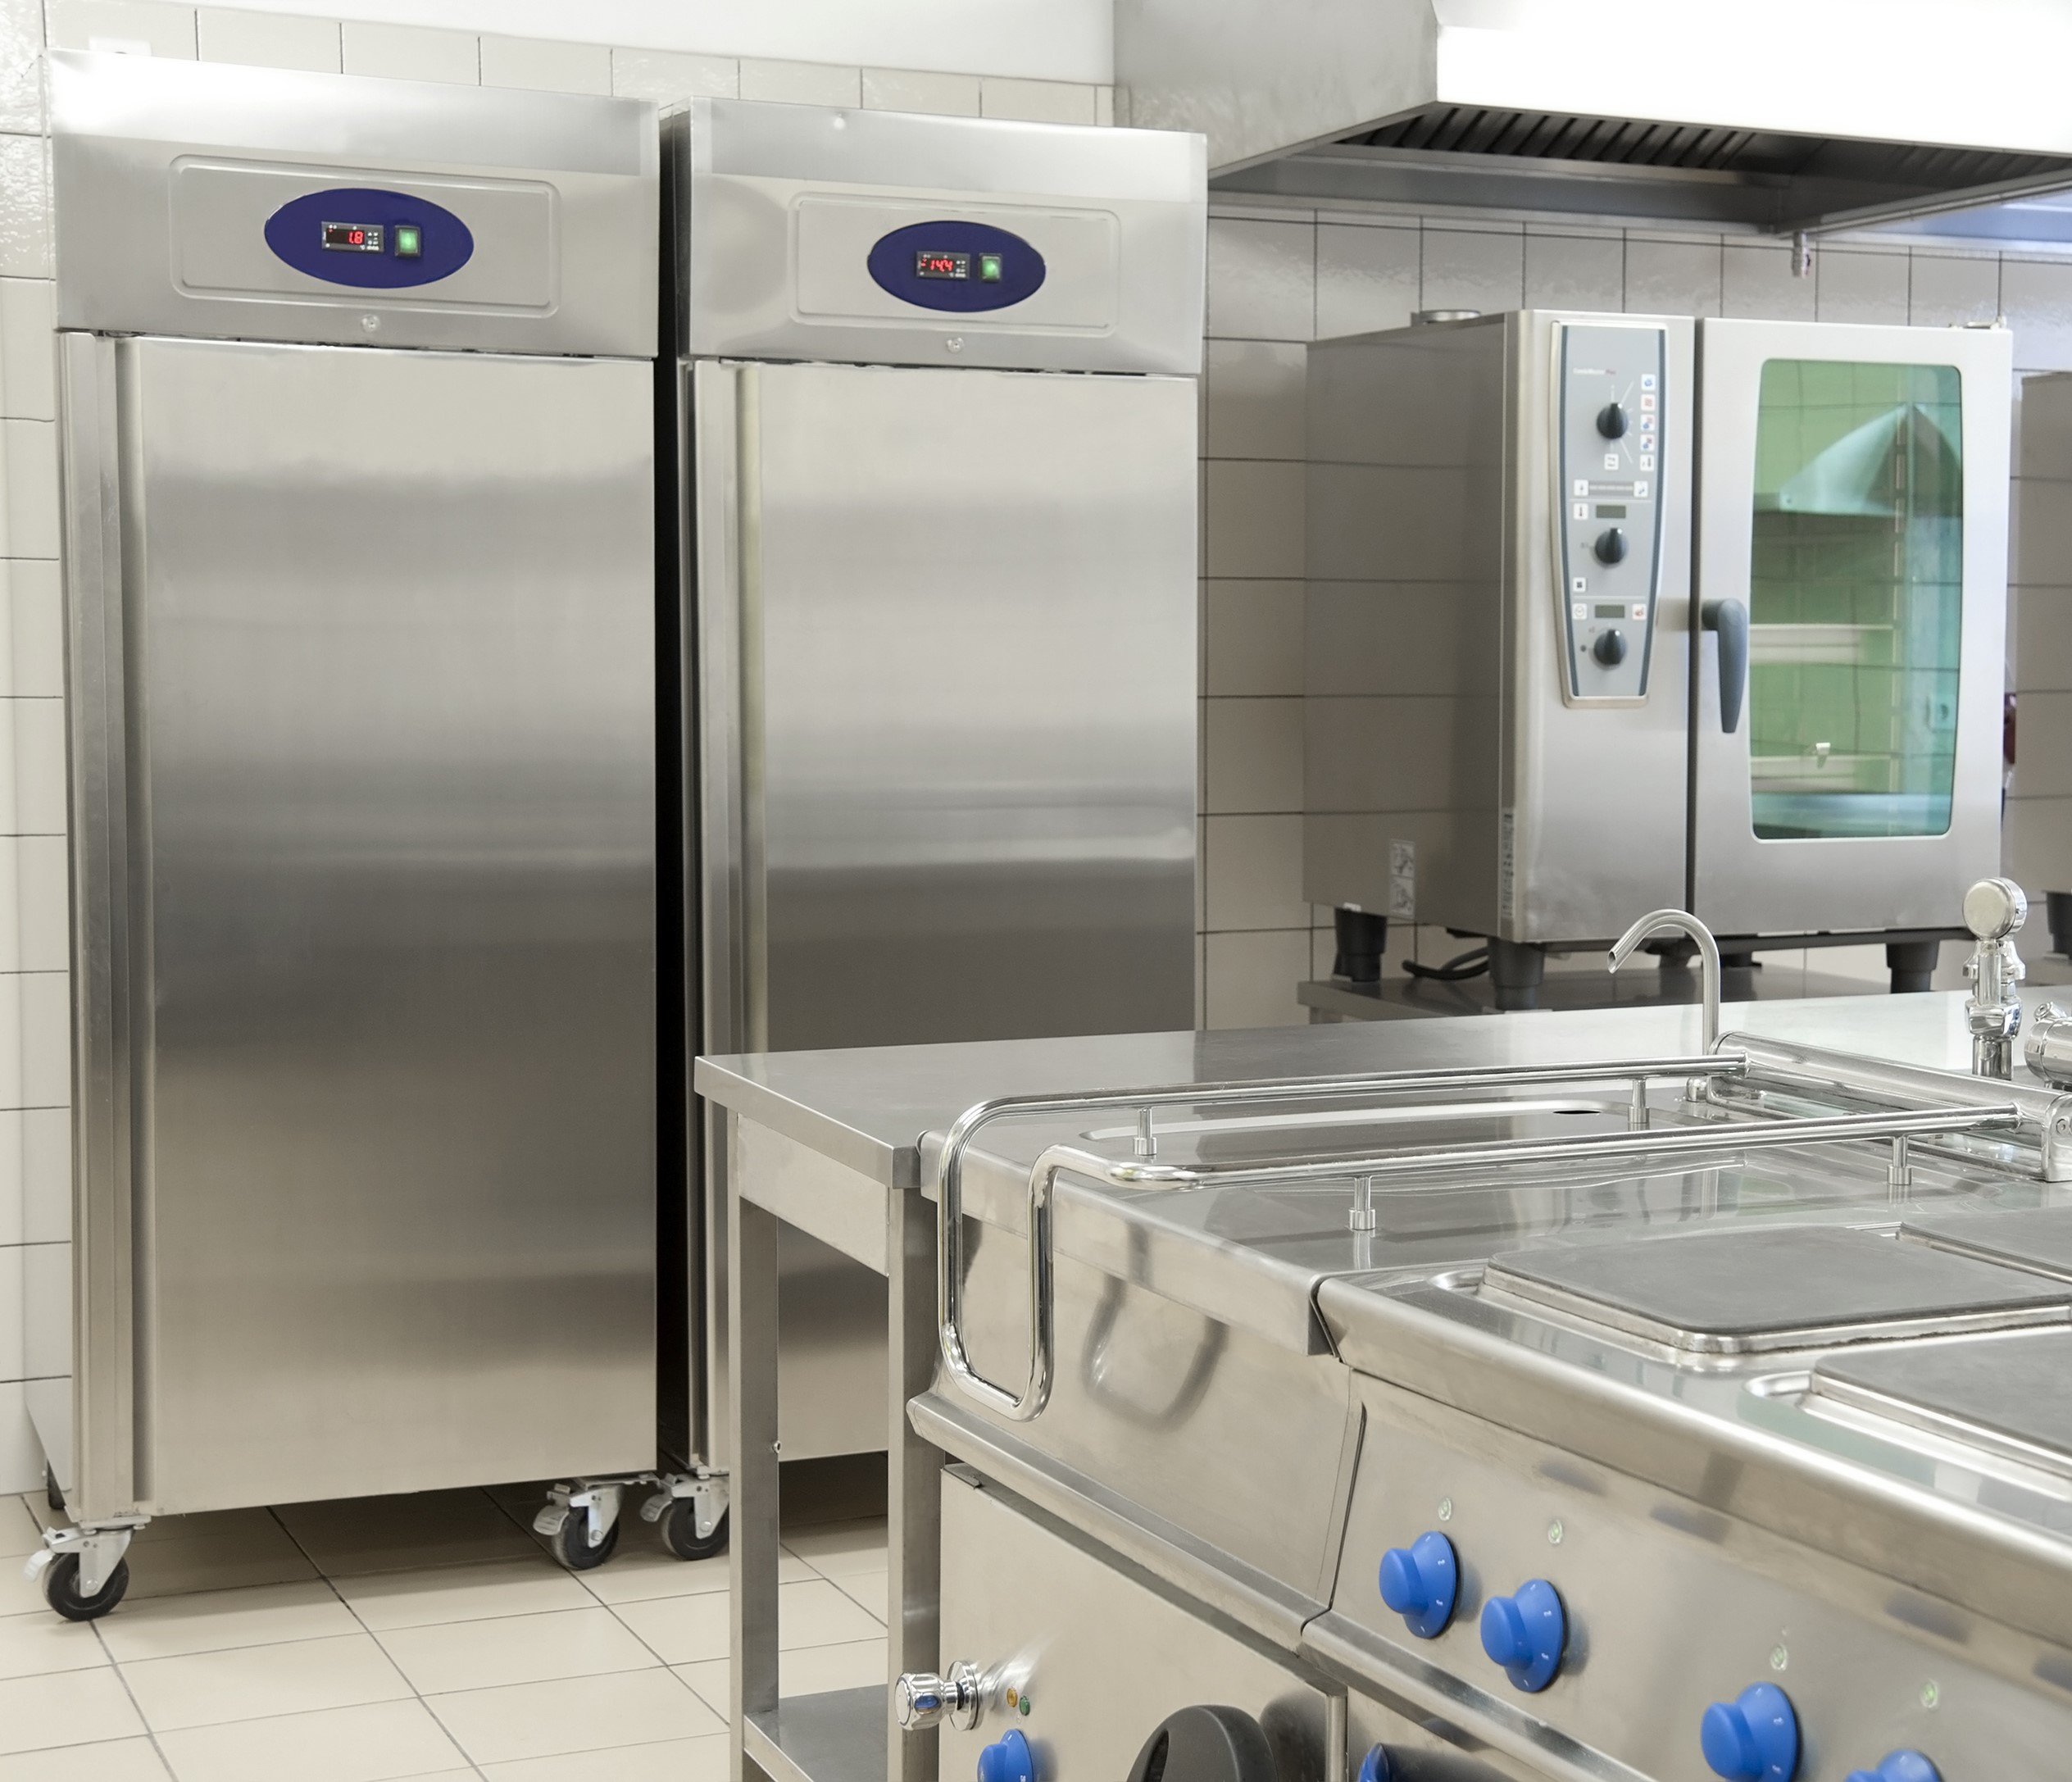 Best practices when reconnecting refrigeration equipment after quarantine